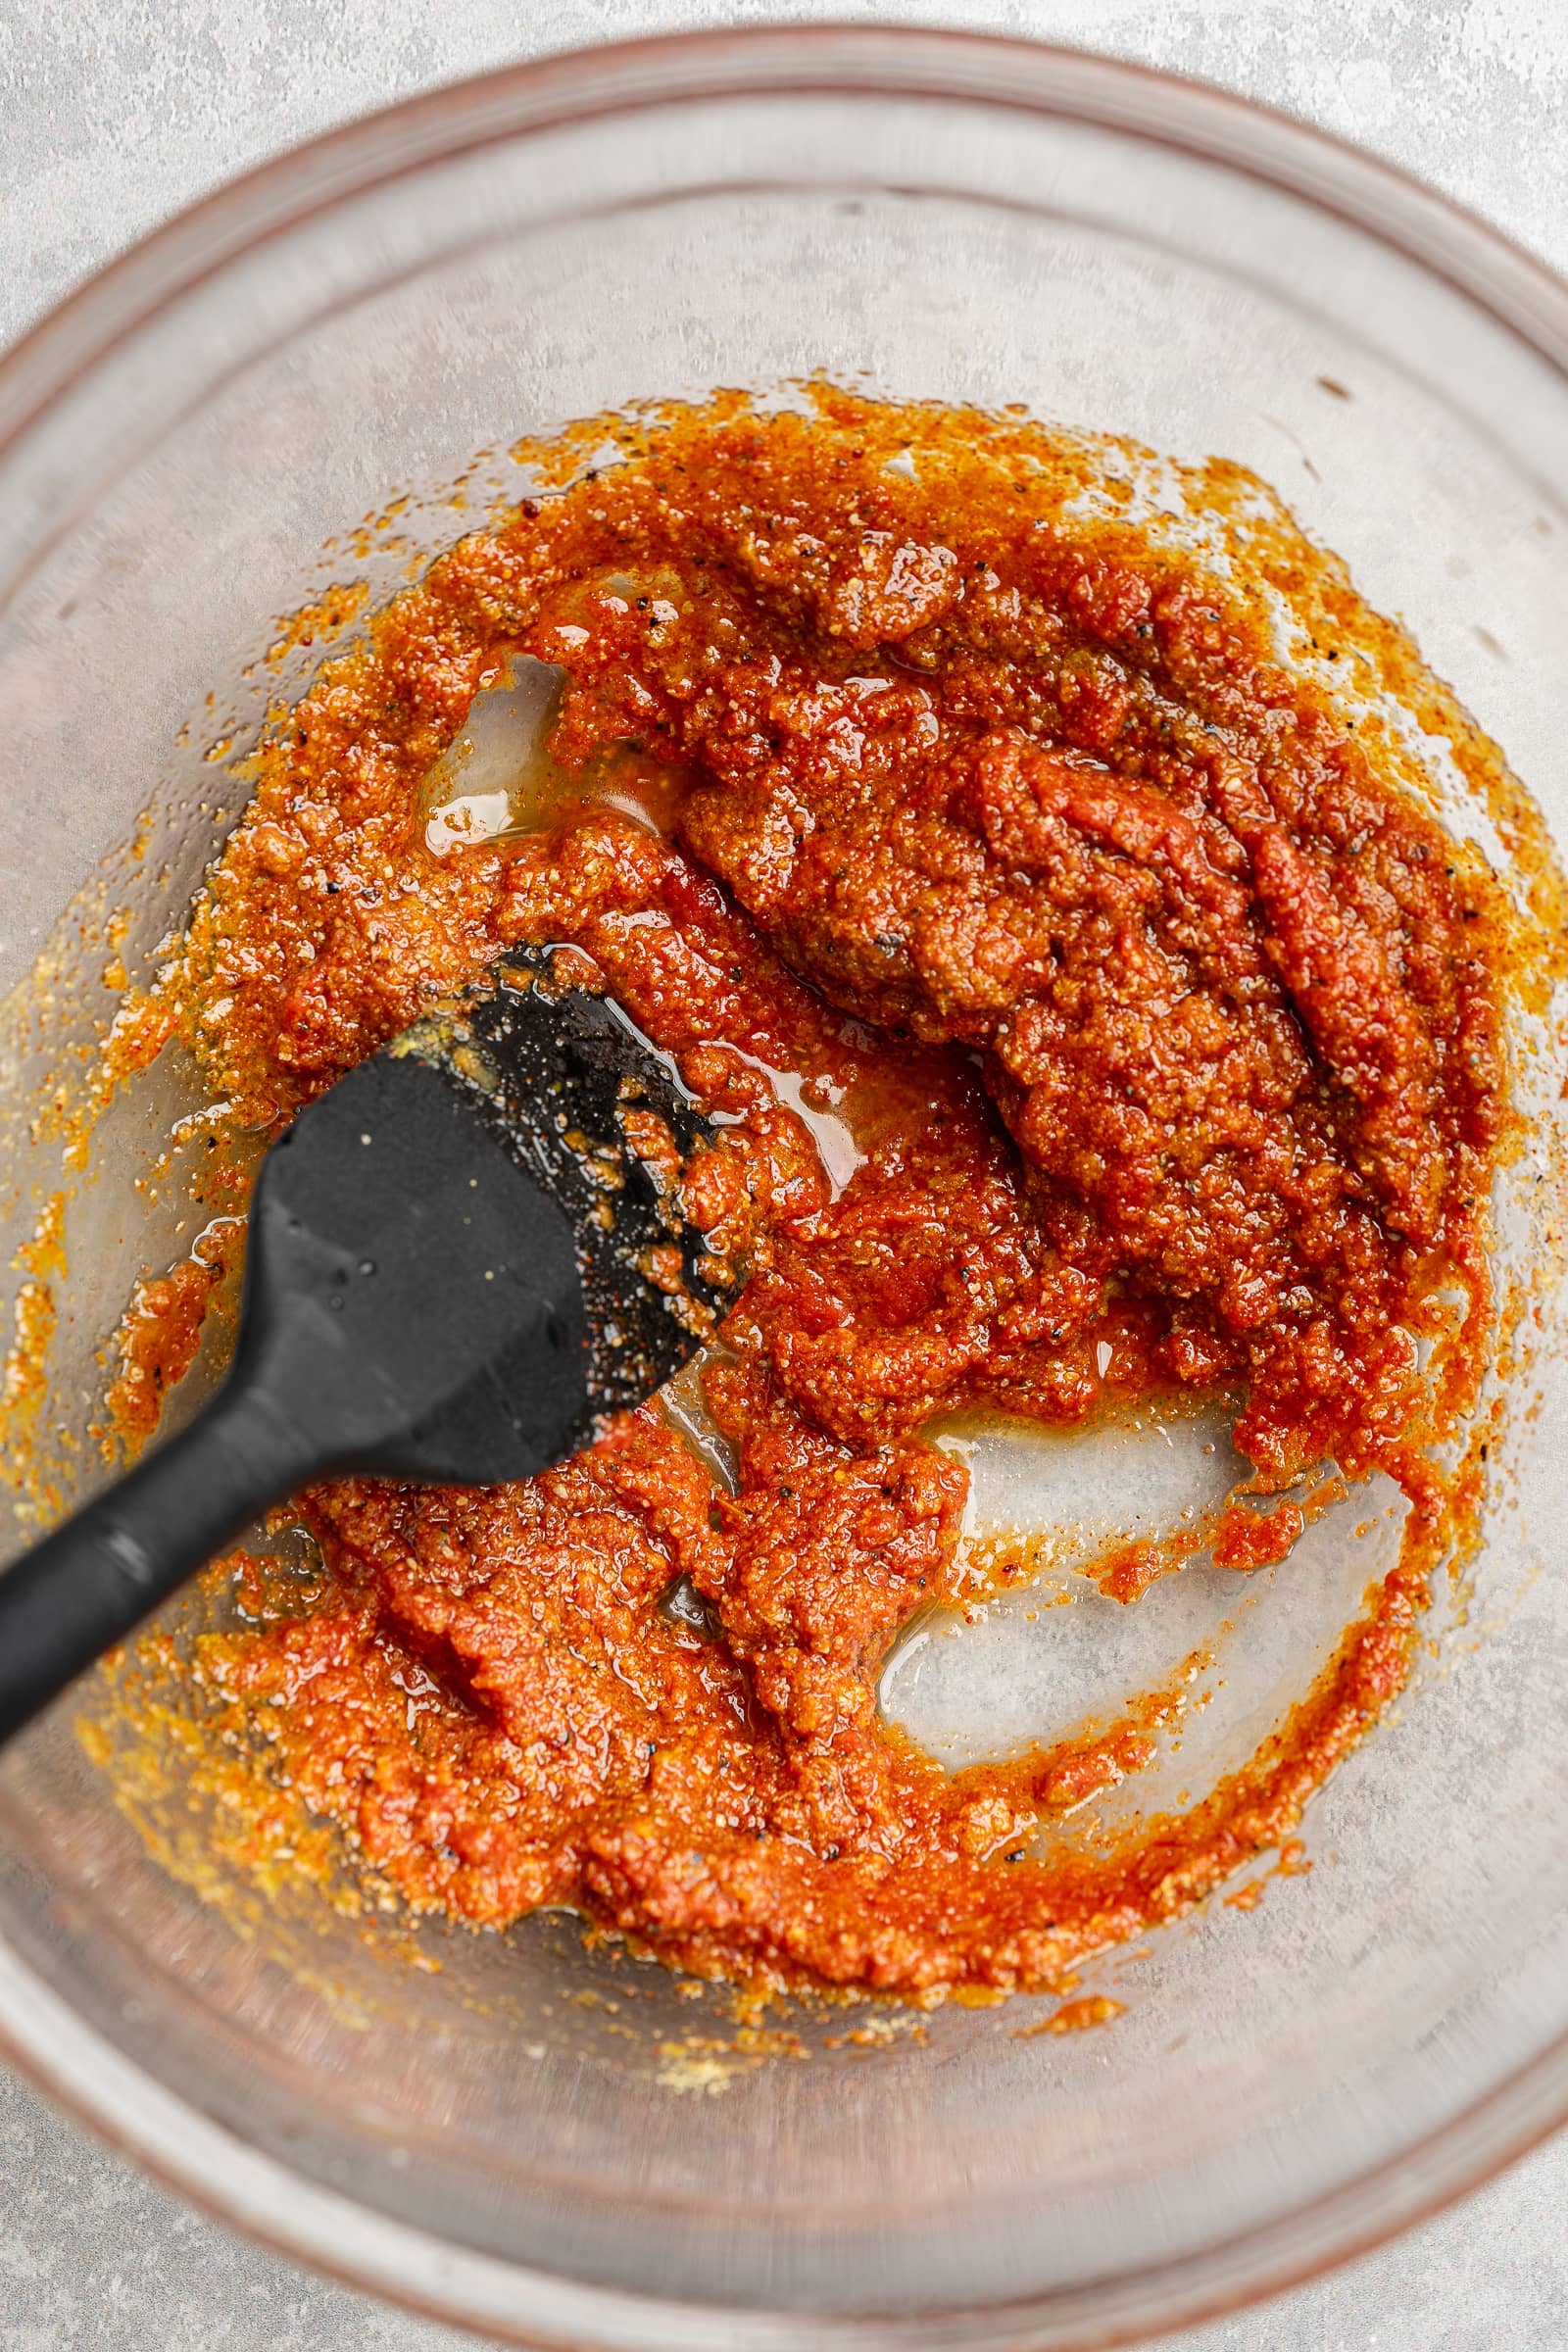 Tomato paste, soy sauce, olive oil, and seasonings mixed together in a large glass bowl.